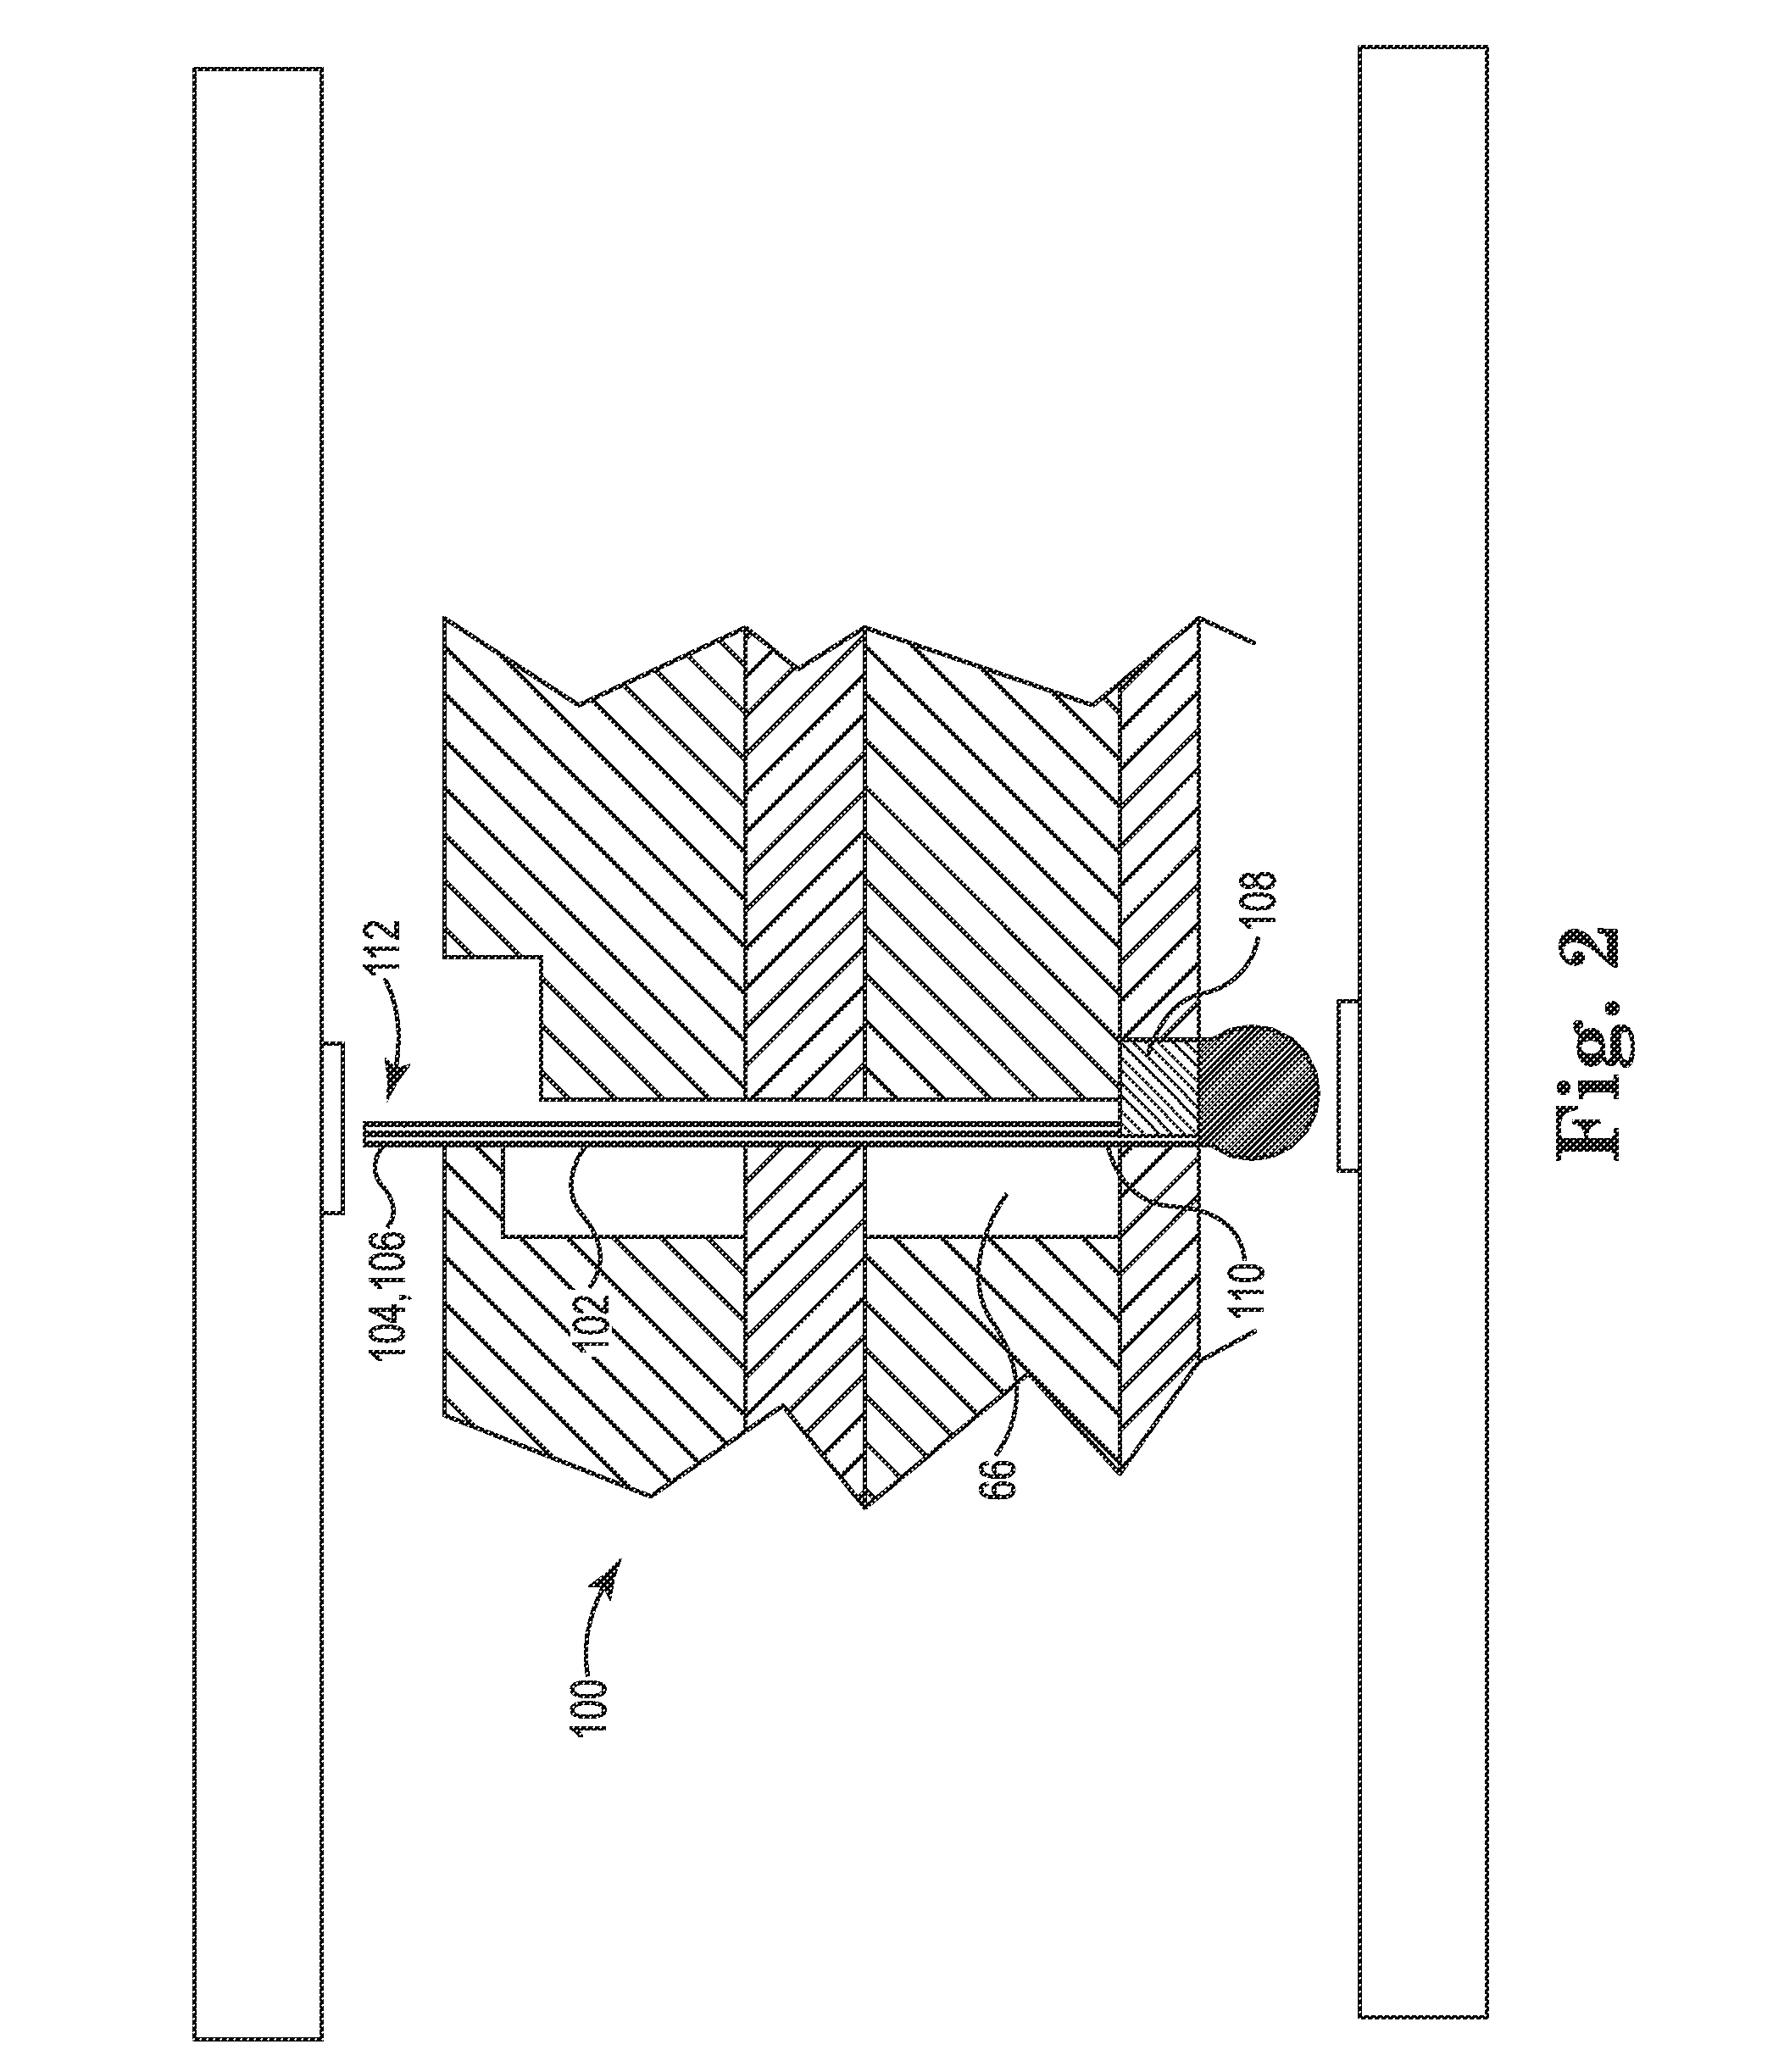 High performance electrical connector with translated insulator contact positioning